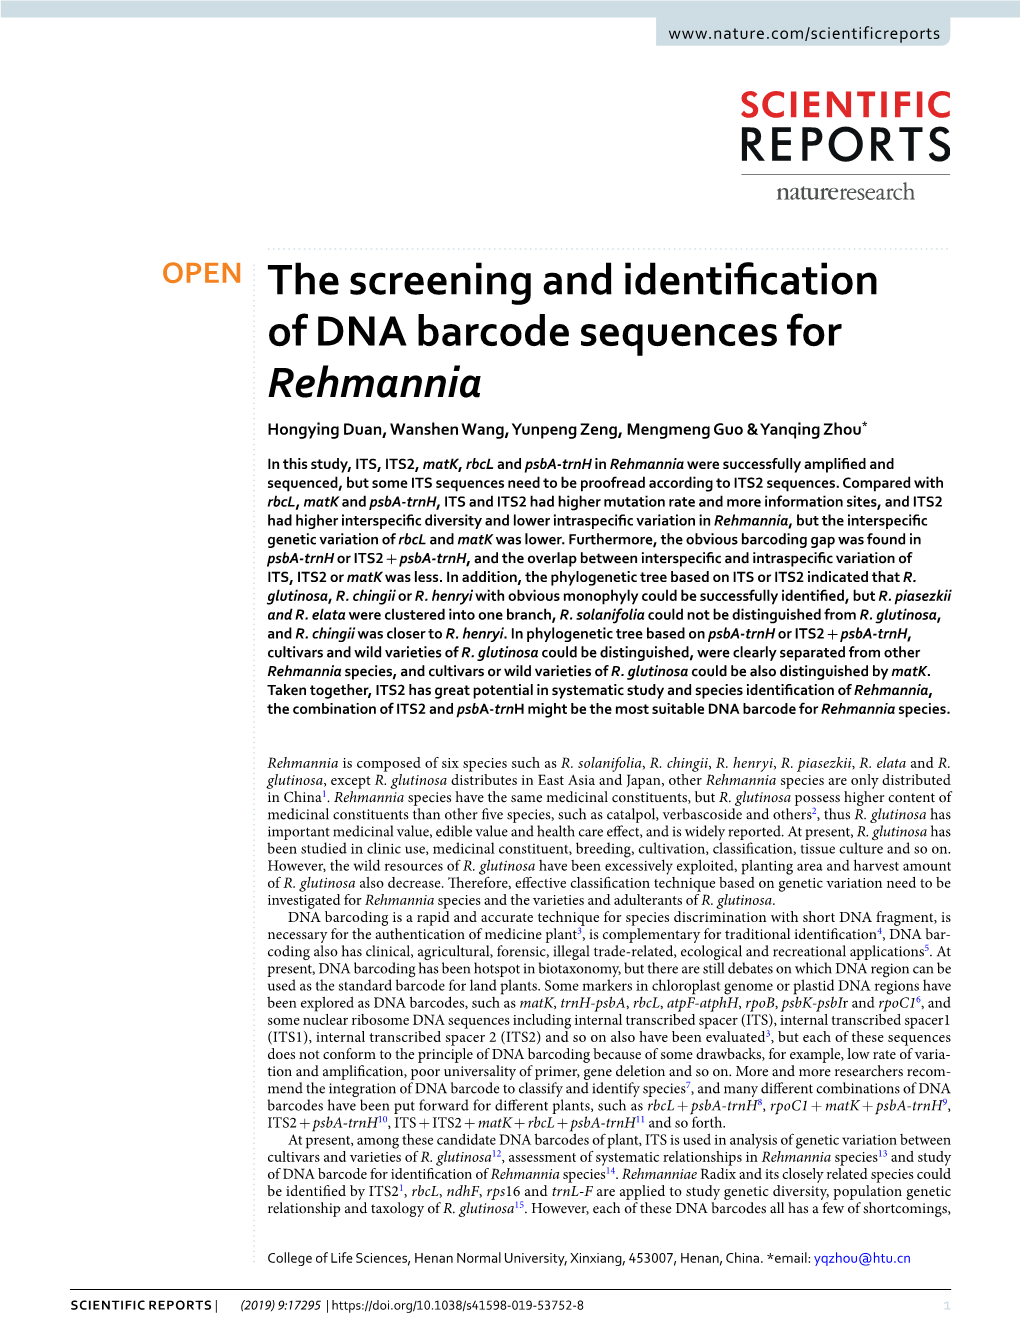 The Screening and Identification of DNA Barcode Sequences